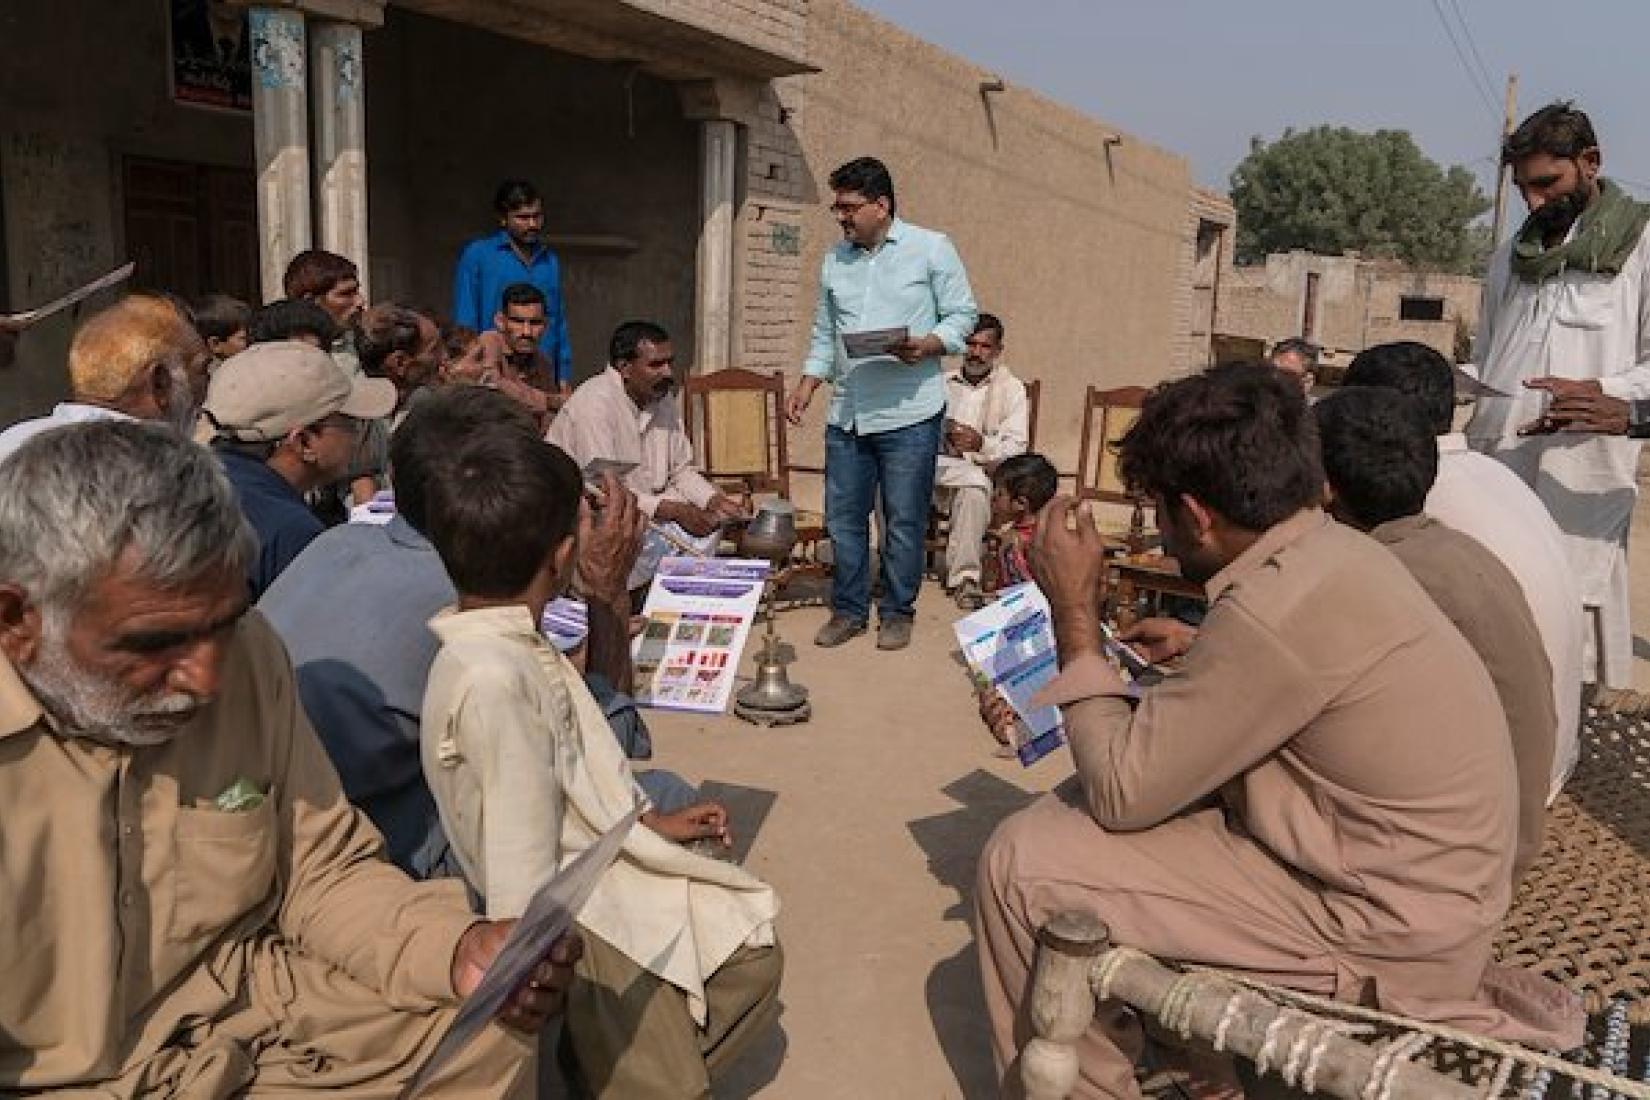 Abdul Aziz from University of Veterinary and Animal Sciences (UVAS) hands out information sheets to the farmers from 96D village in rural Punjab Province. Image: ACIAR/Conor Ashleigh